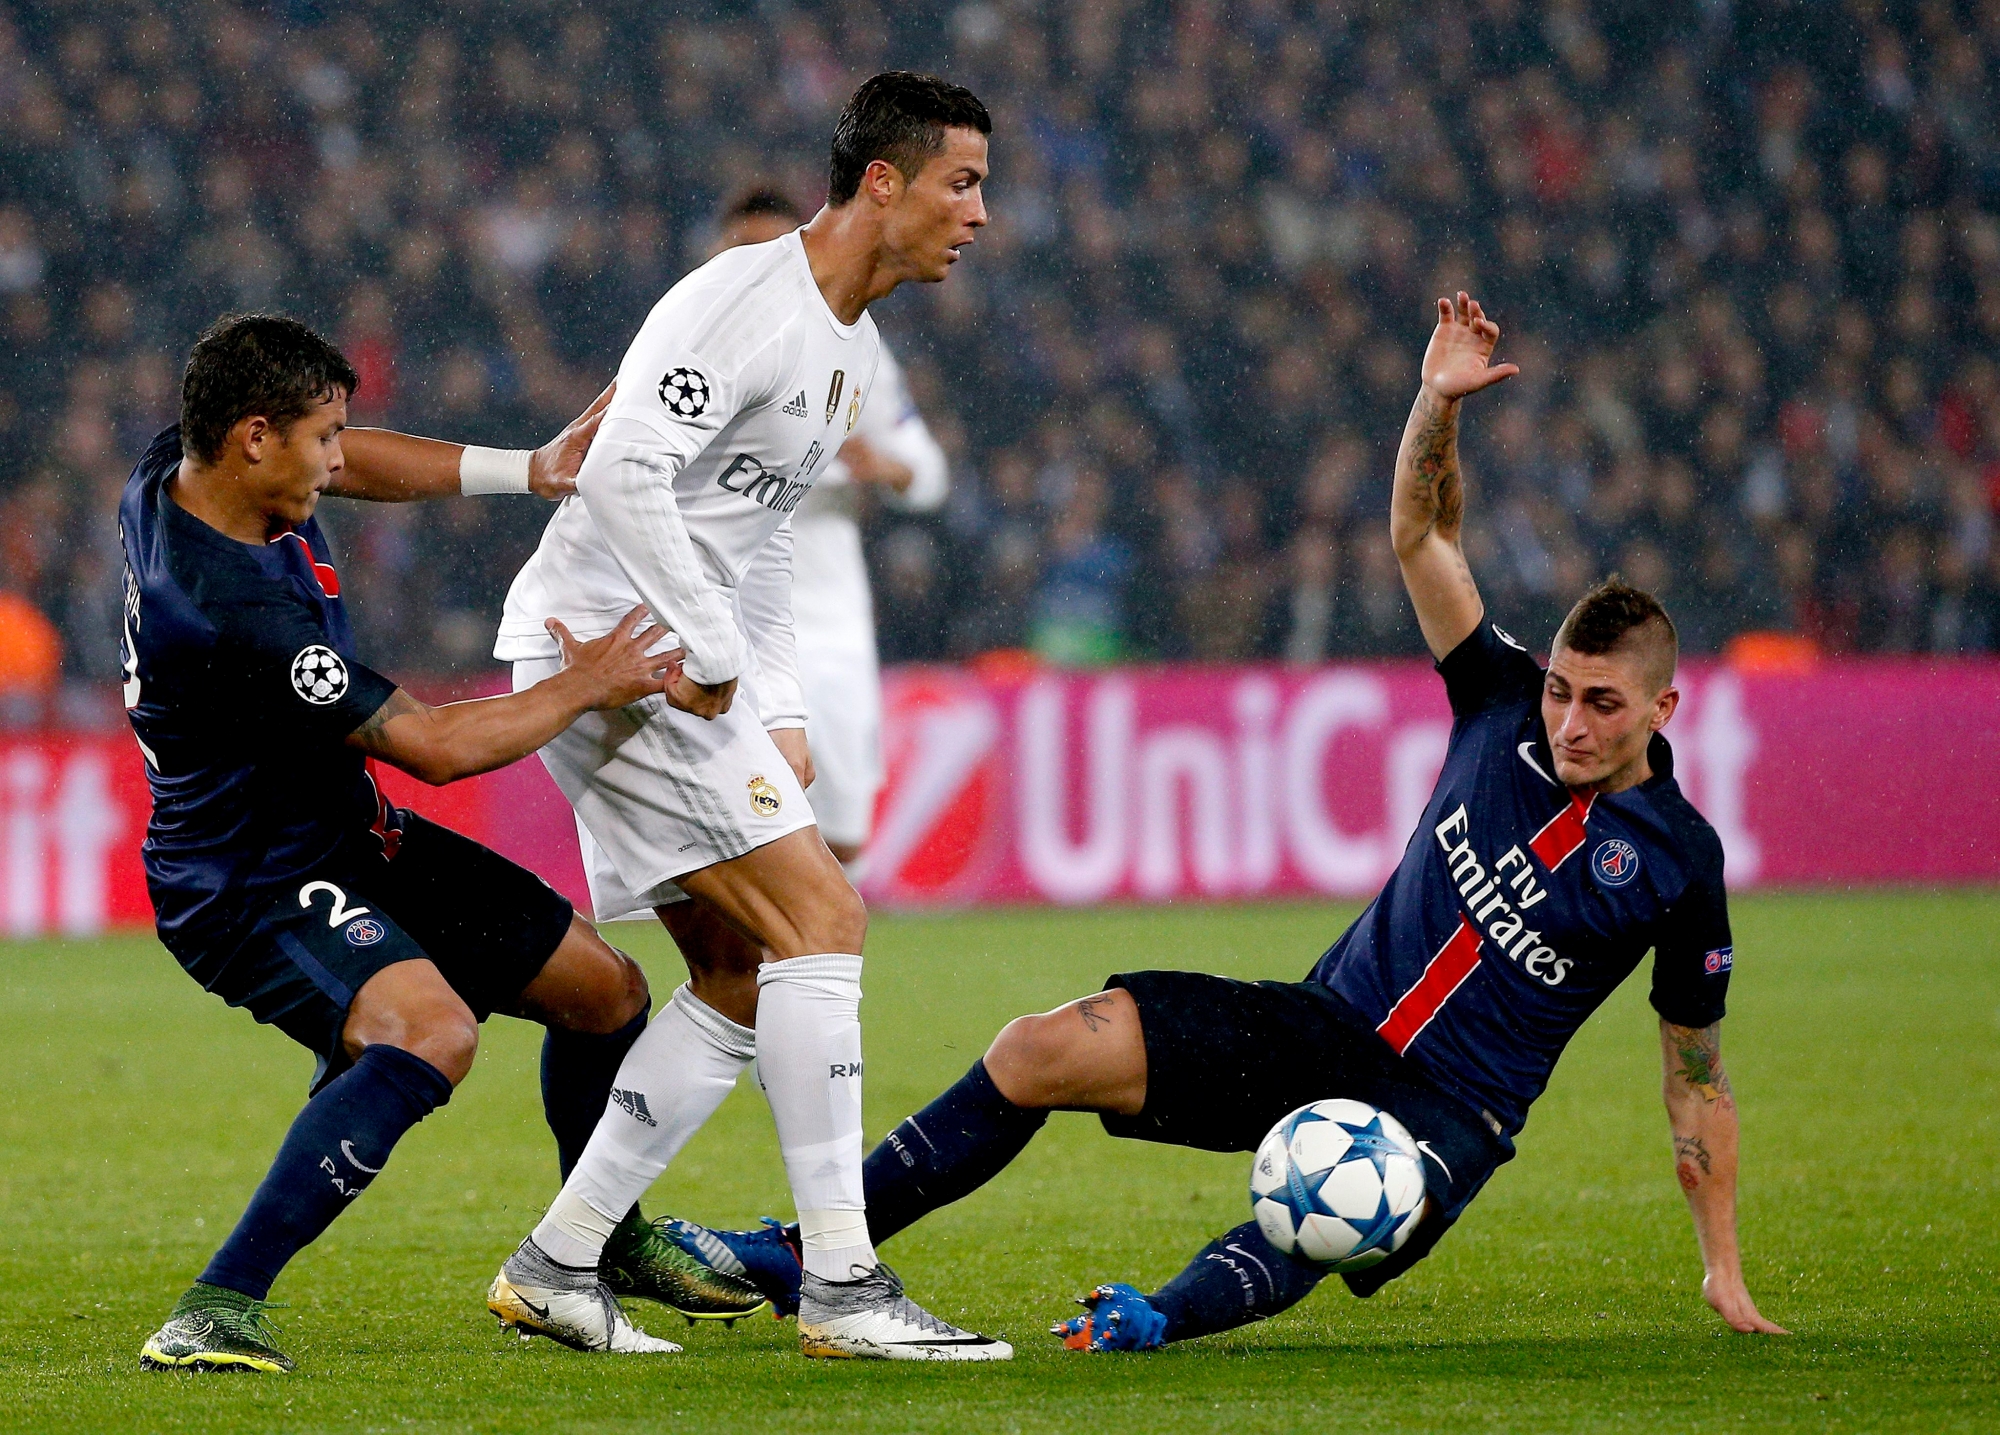 epa04987840 Cristiano Ronaldo of Real Madrid (C) vies for the ball with and Thiago Silva of Paris Saint Germain (L) and Marco Verratti of Paris St Germain (R) during the UEFA Champions League group A soccer match between Paris Saint Germain (PSG) and Real Madrid at the Parc des Princes stadium in Paris, France, 21 October, 2015.  EPA/YOAN VALAT FUSSBALL CL 2015/16 PSG REAL MADRID